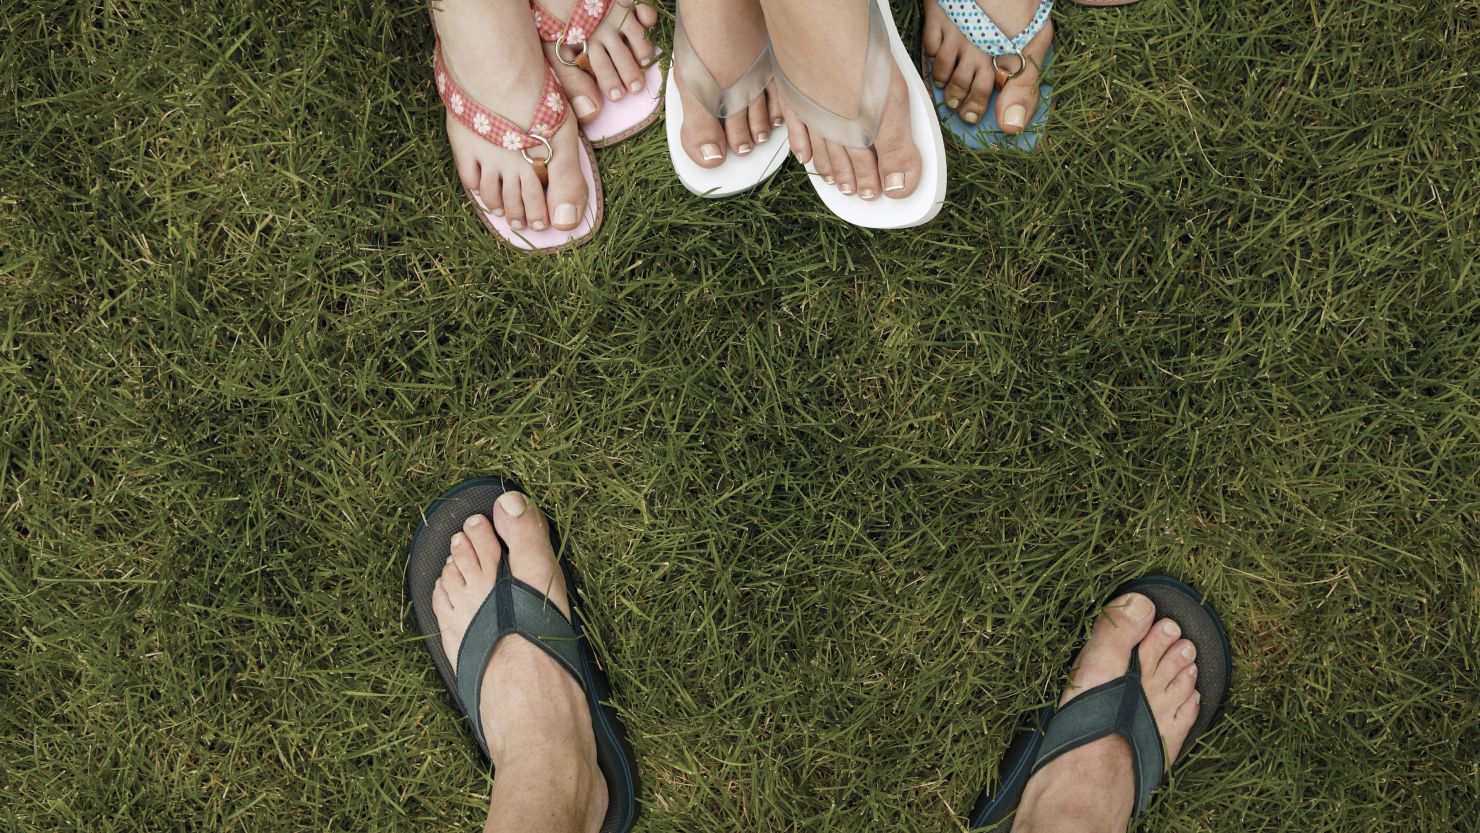 Flip-flops present feet with a painful problem